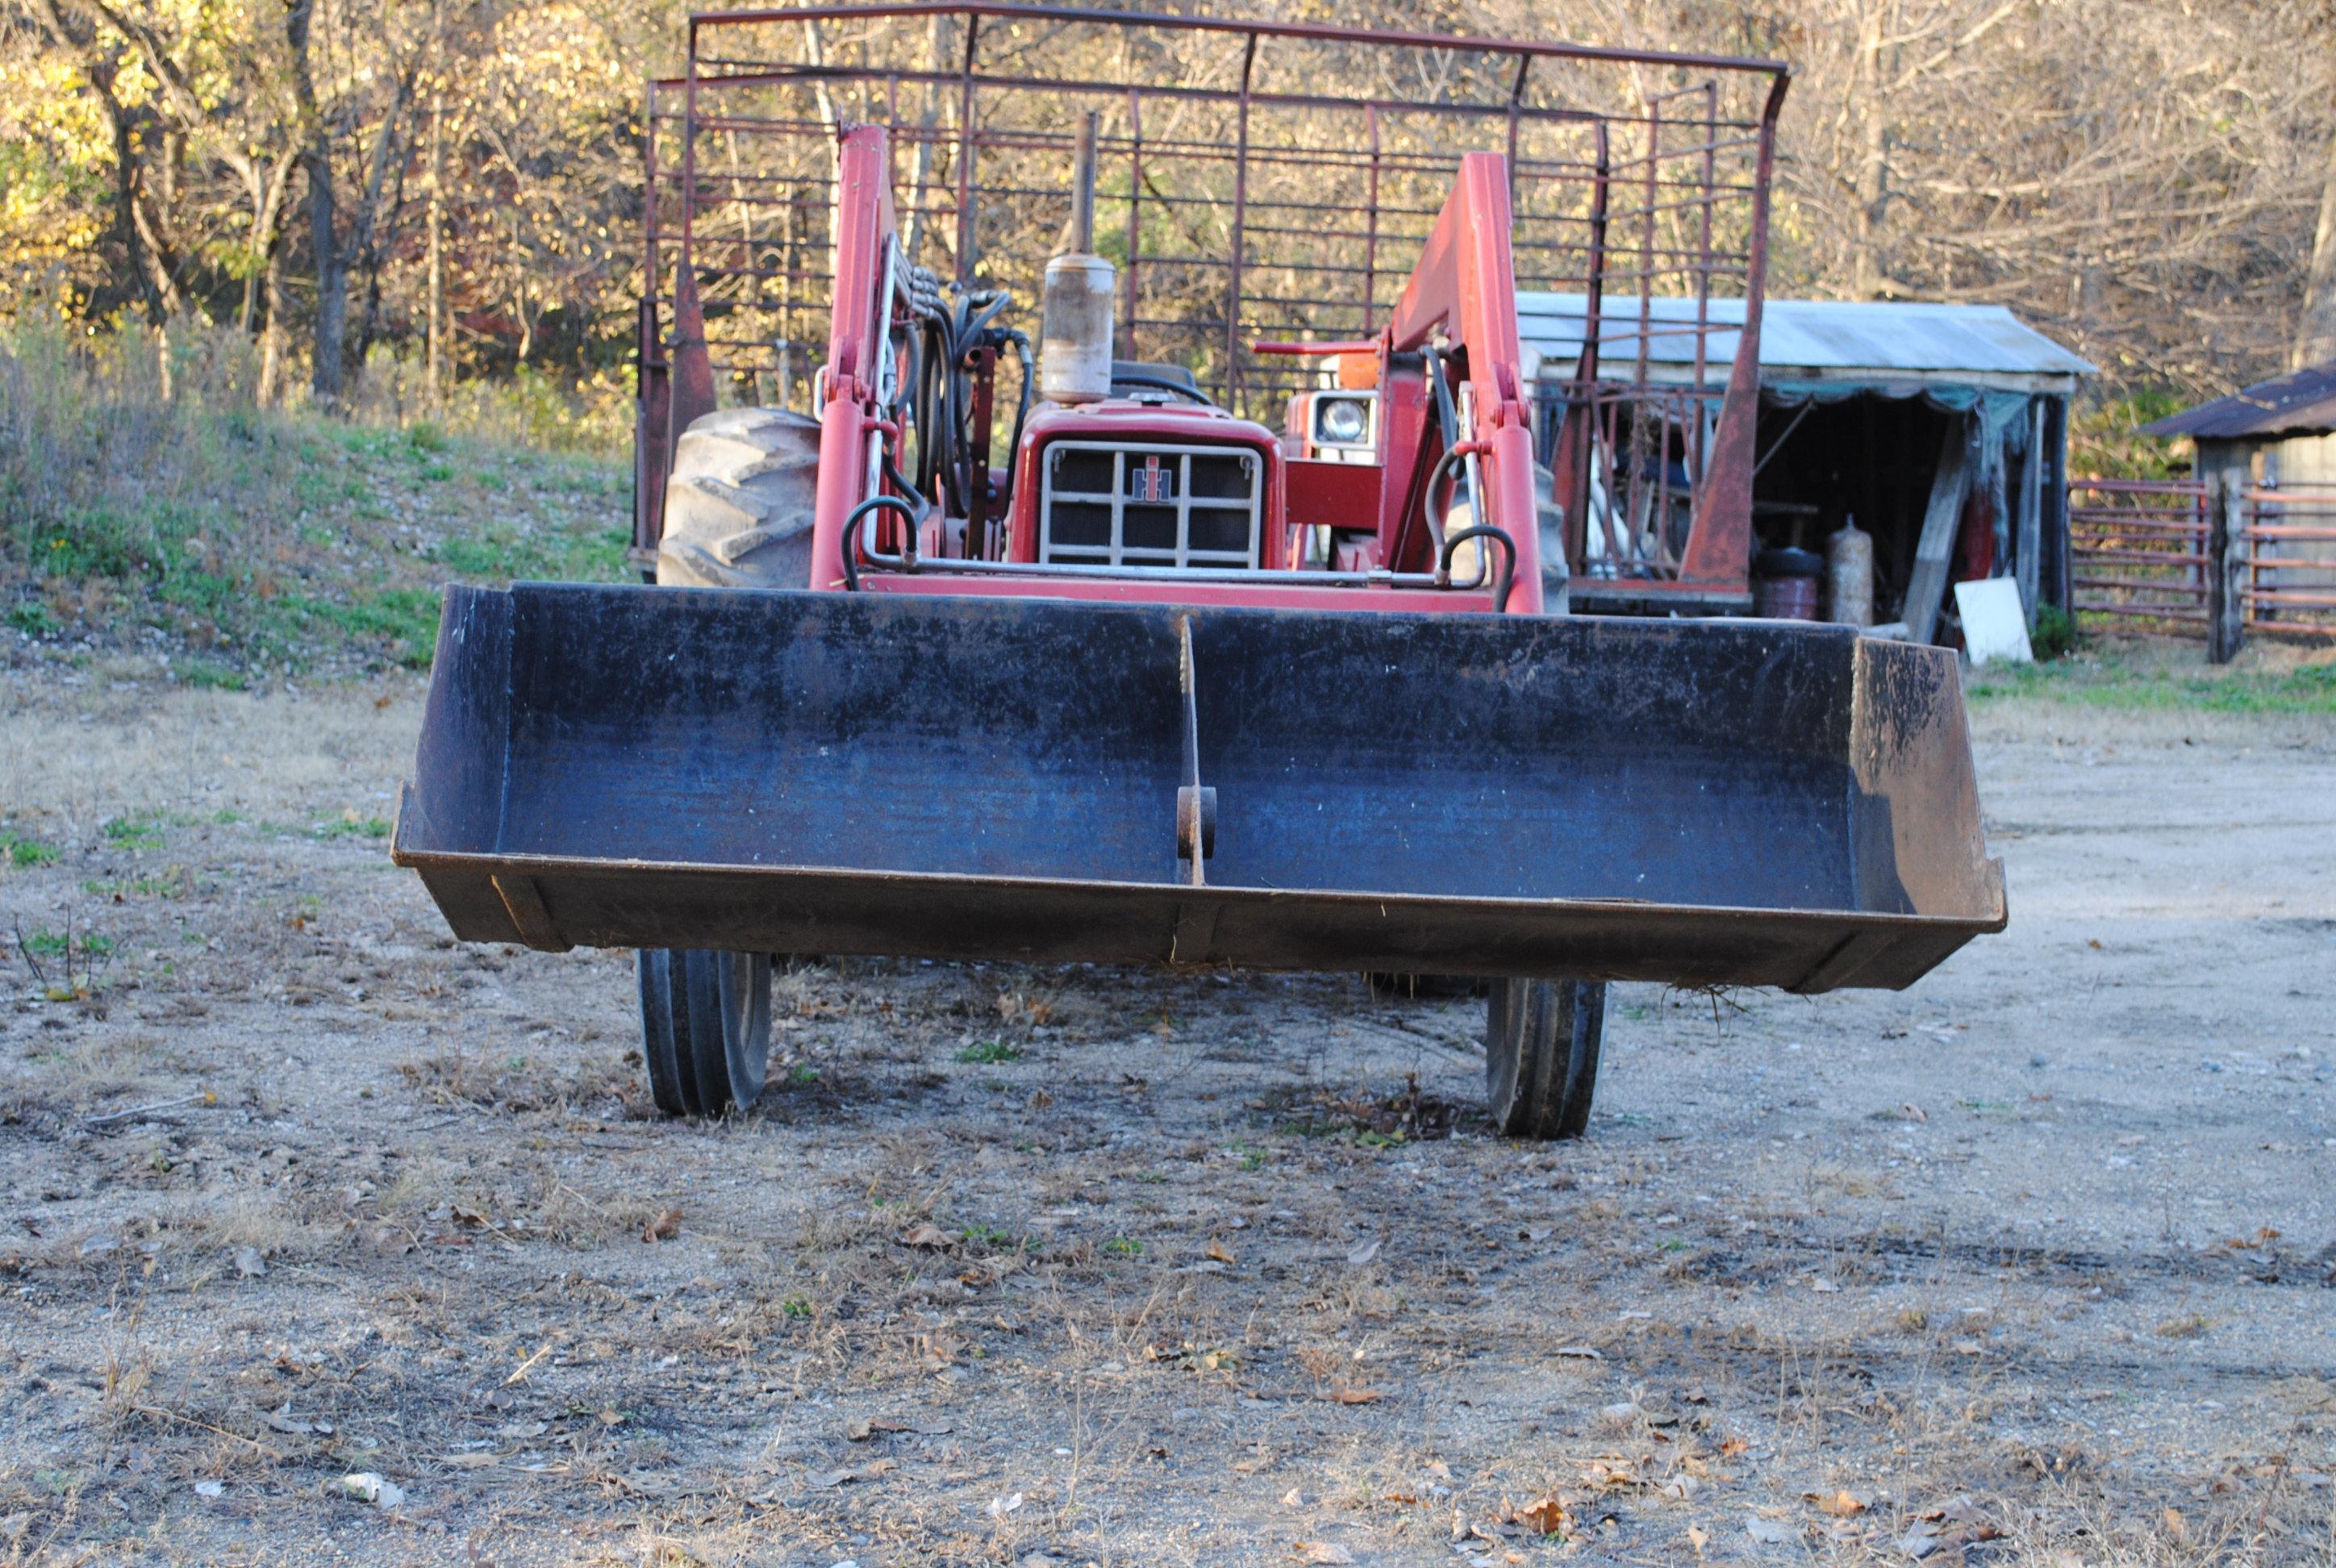 IH 574 gas tractor with all hydraulic loader, wide front, $2000 in repairs, new radiator, clutch, va